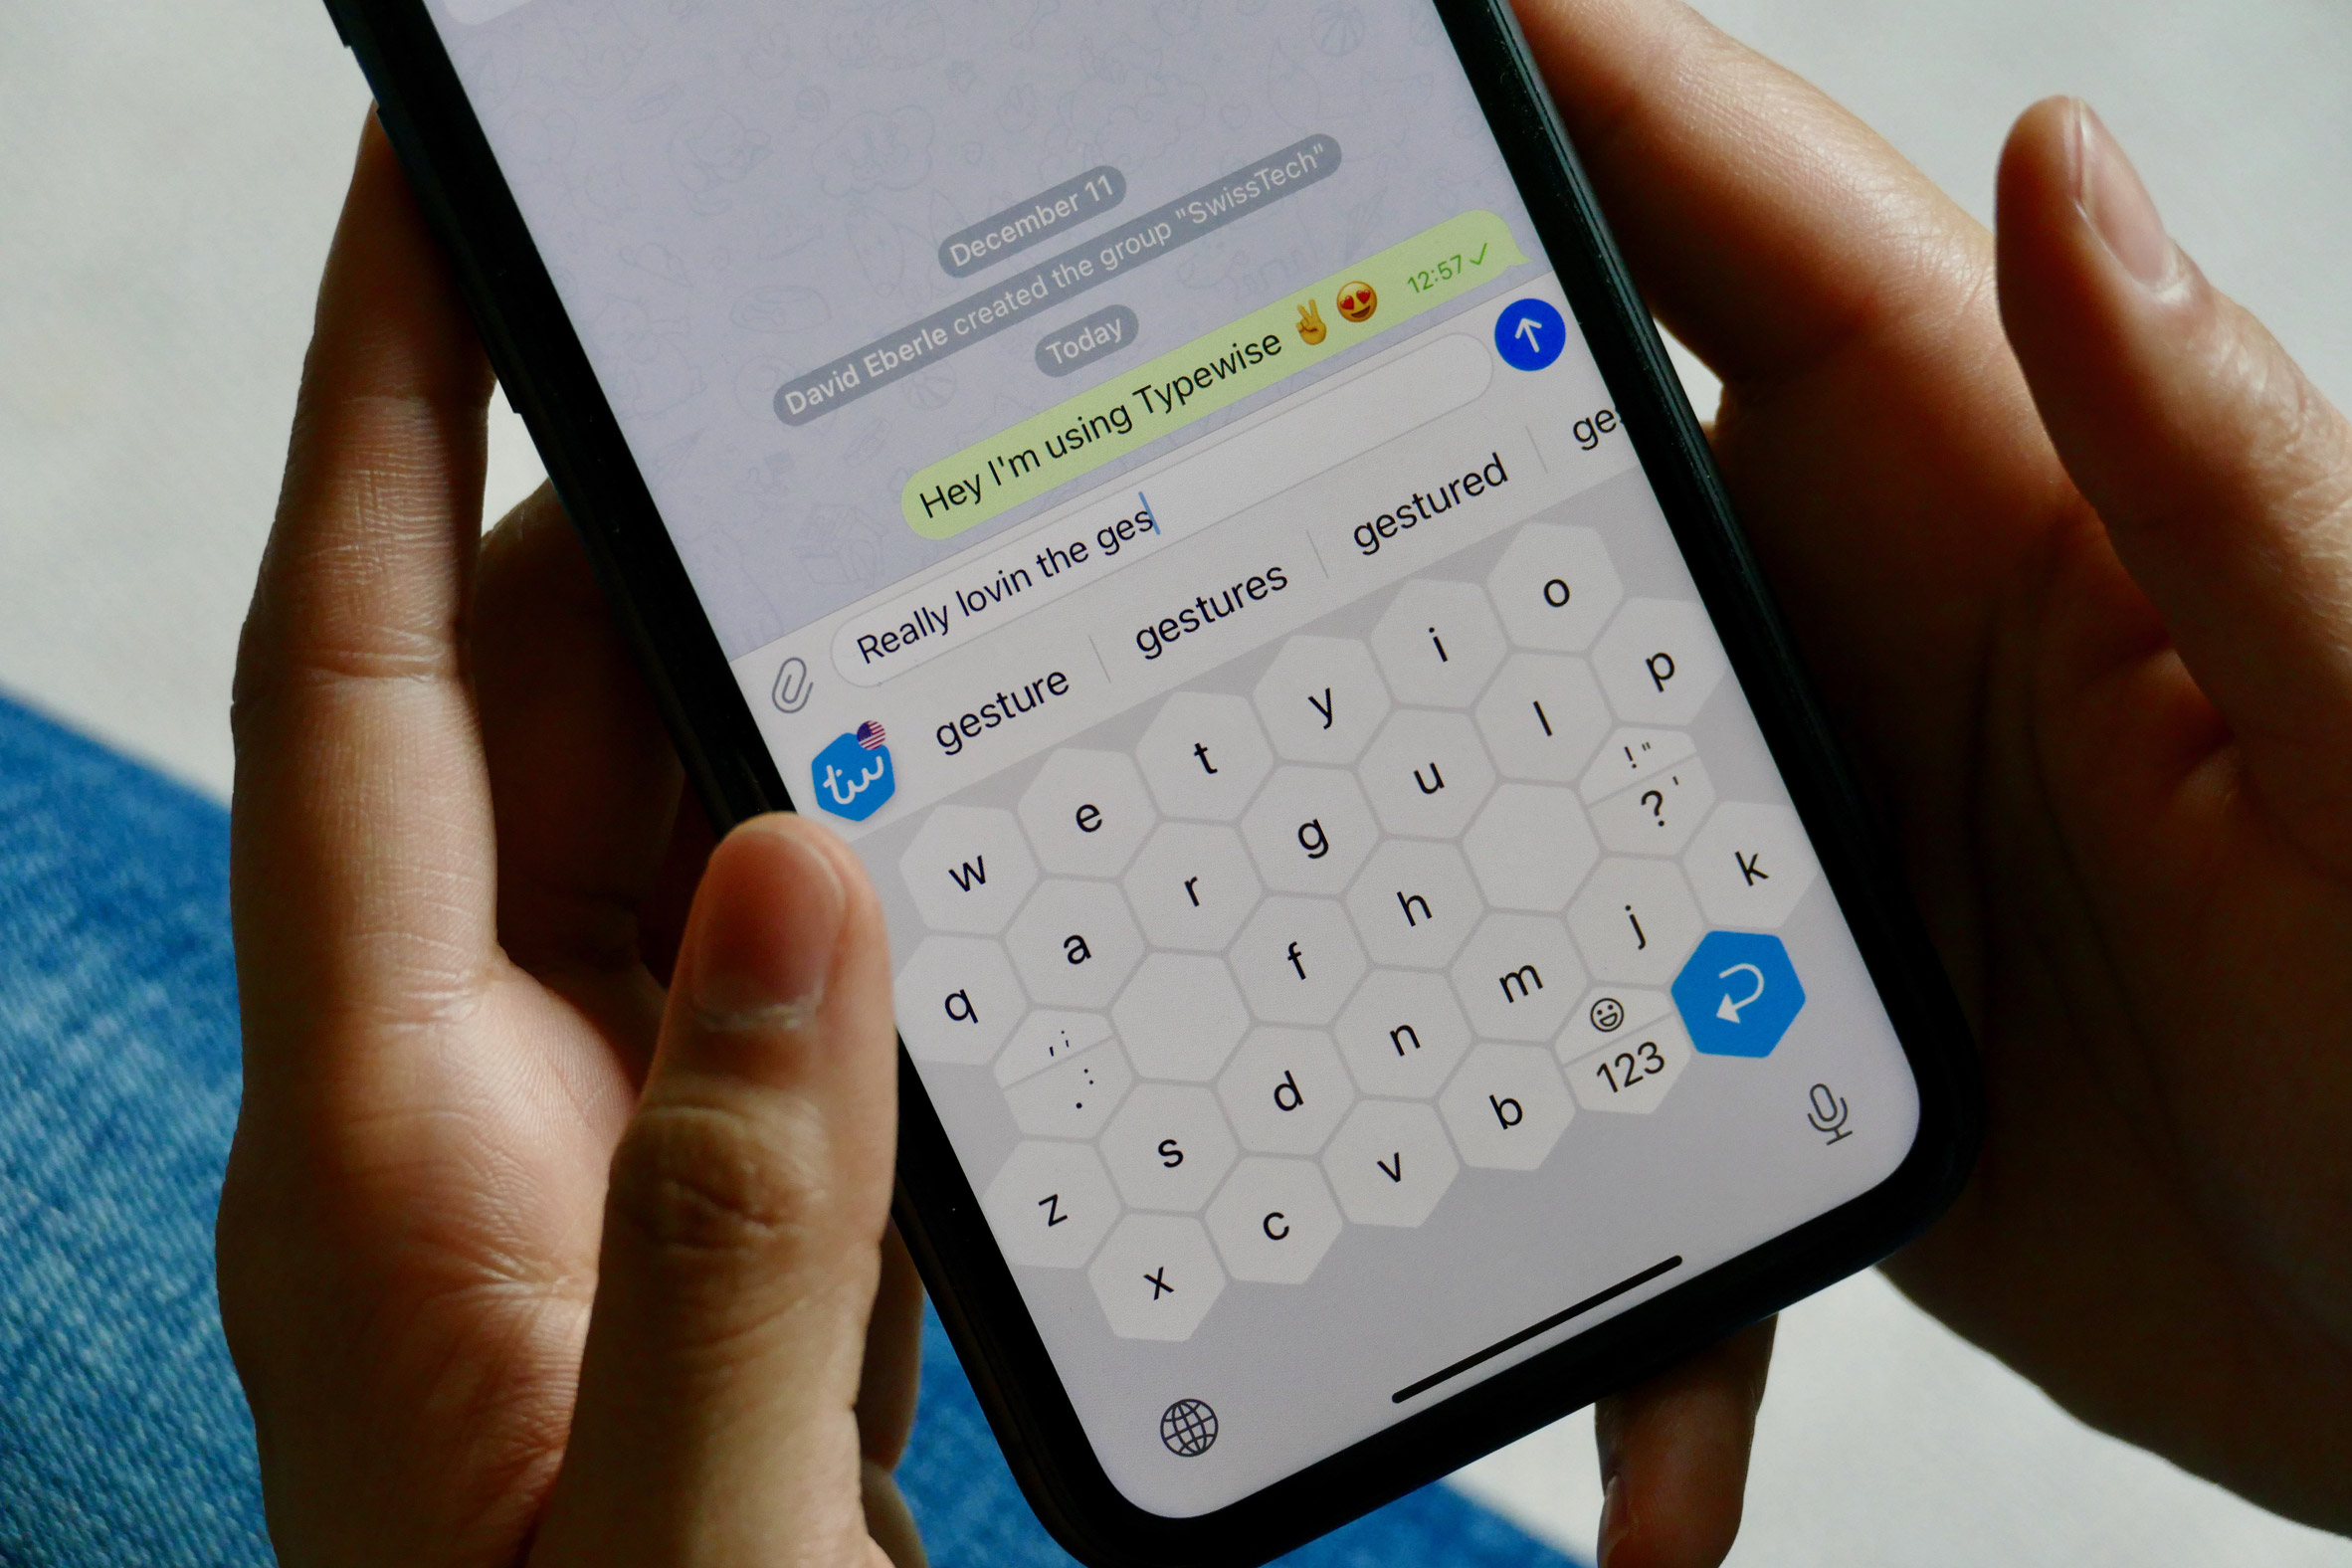 keyboard uses artificial intelligence to improve smartphone typing